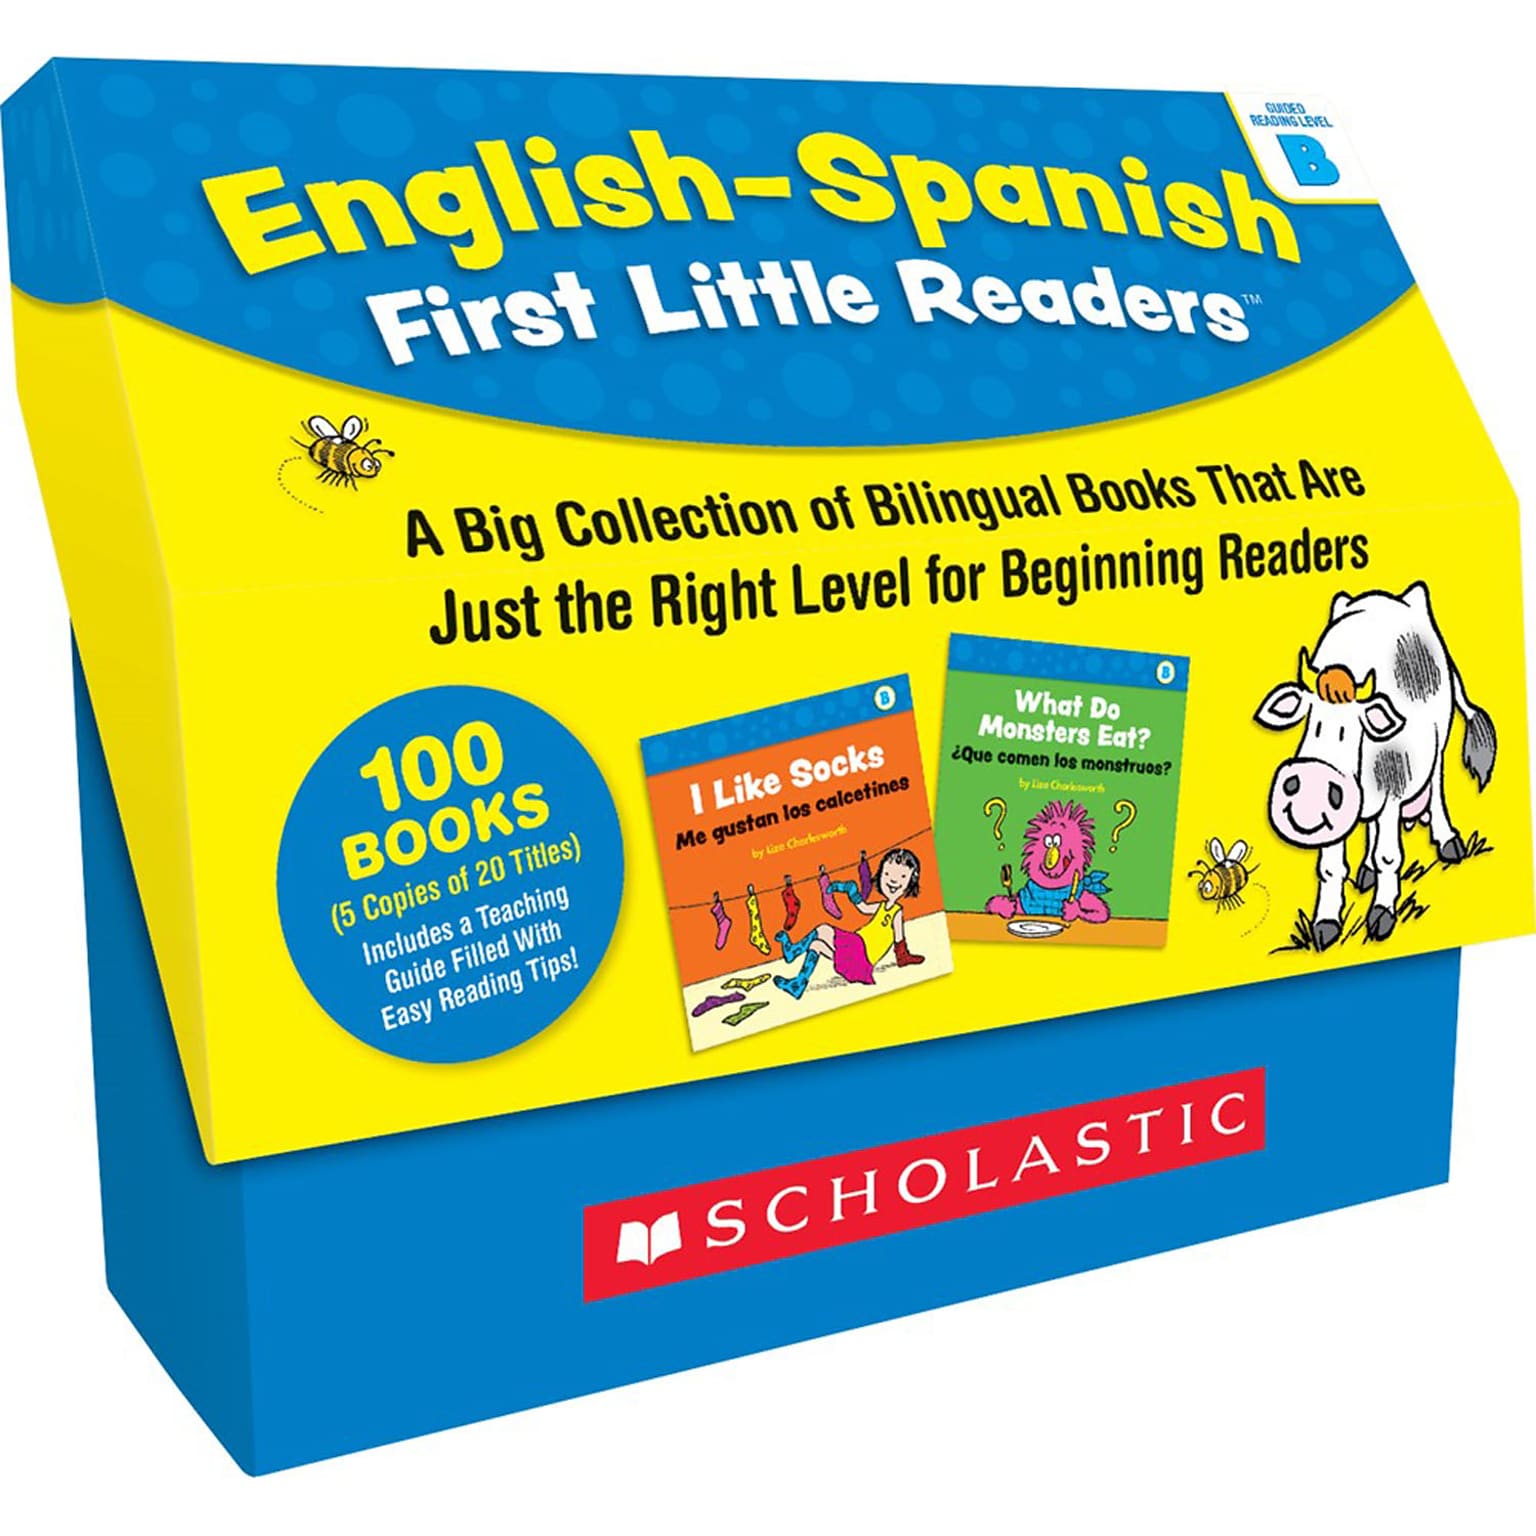 Scholastic Teacher Resources English-Spanish First Little Readers: Guided Reading Level B Classroom Set (SC-866804)